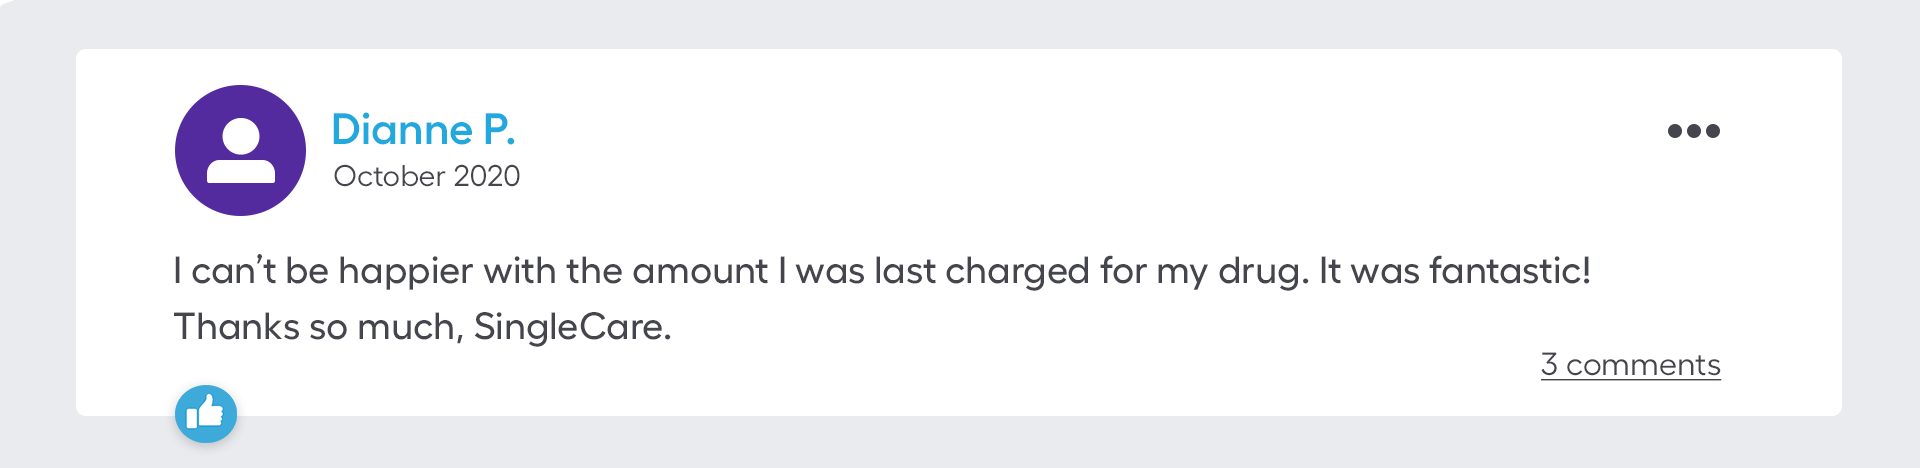 I can't be happier with the amount I was last charged for my drug. It was fantastic! Thanks so much, SingleCare.